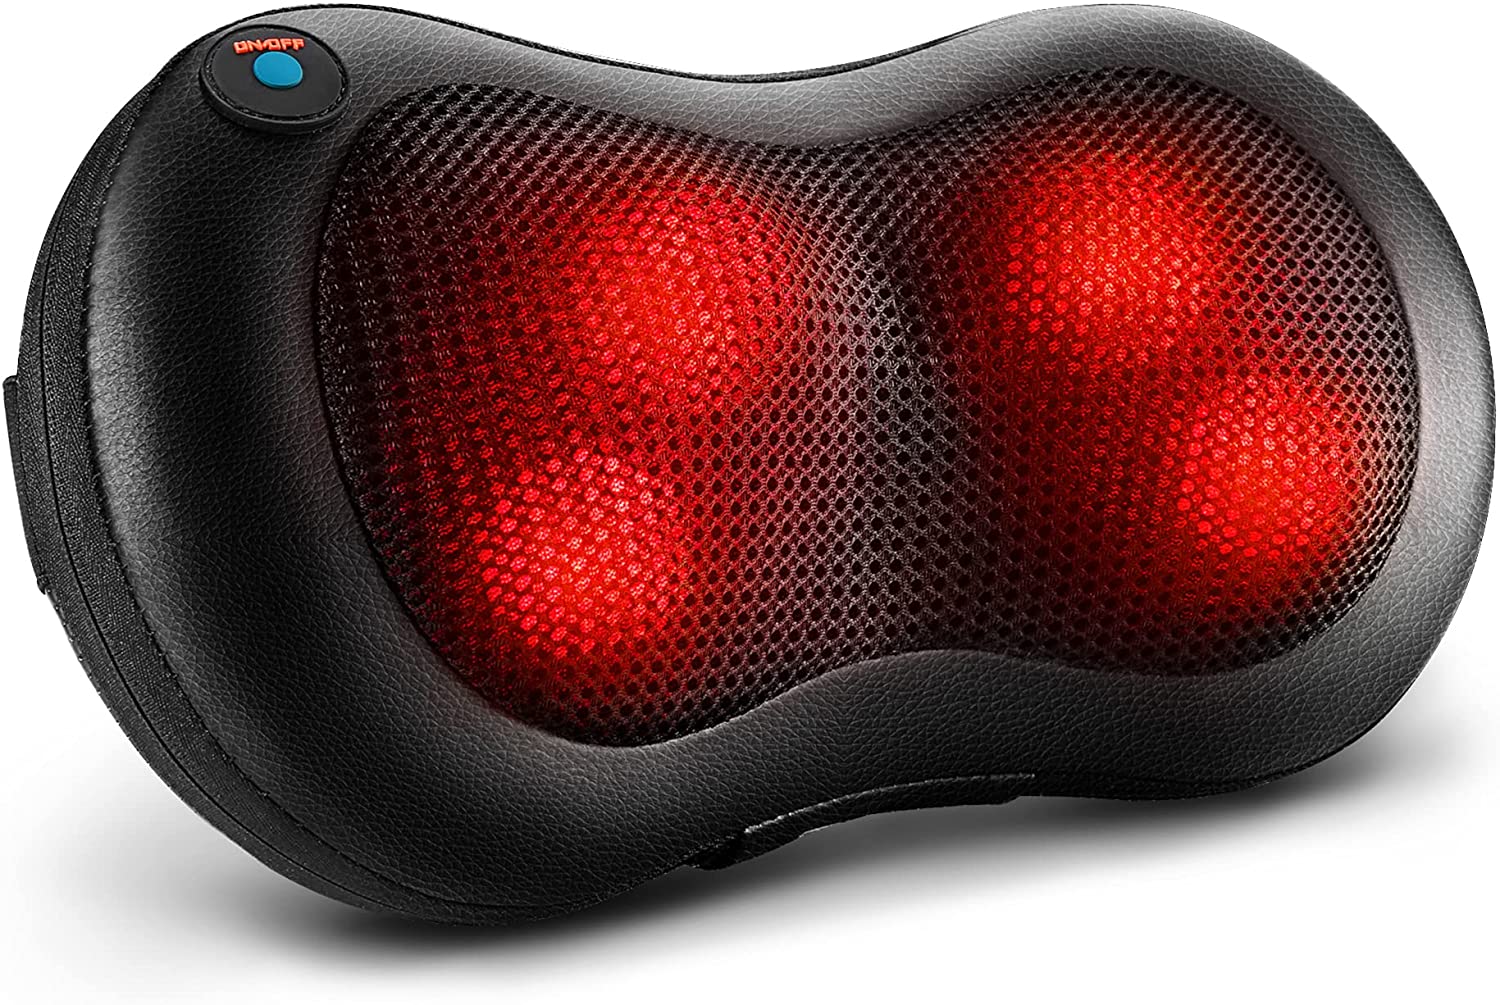 Naipo Shiatsu Pillow Massager Neck Back Massage with Heat, Deep Tissue Kneading for Full Body Muscle Pain Relief, Portable Relaxation in Car Home and Office - Black